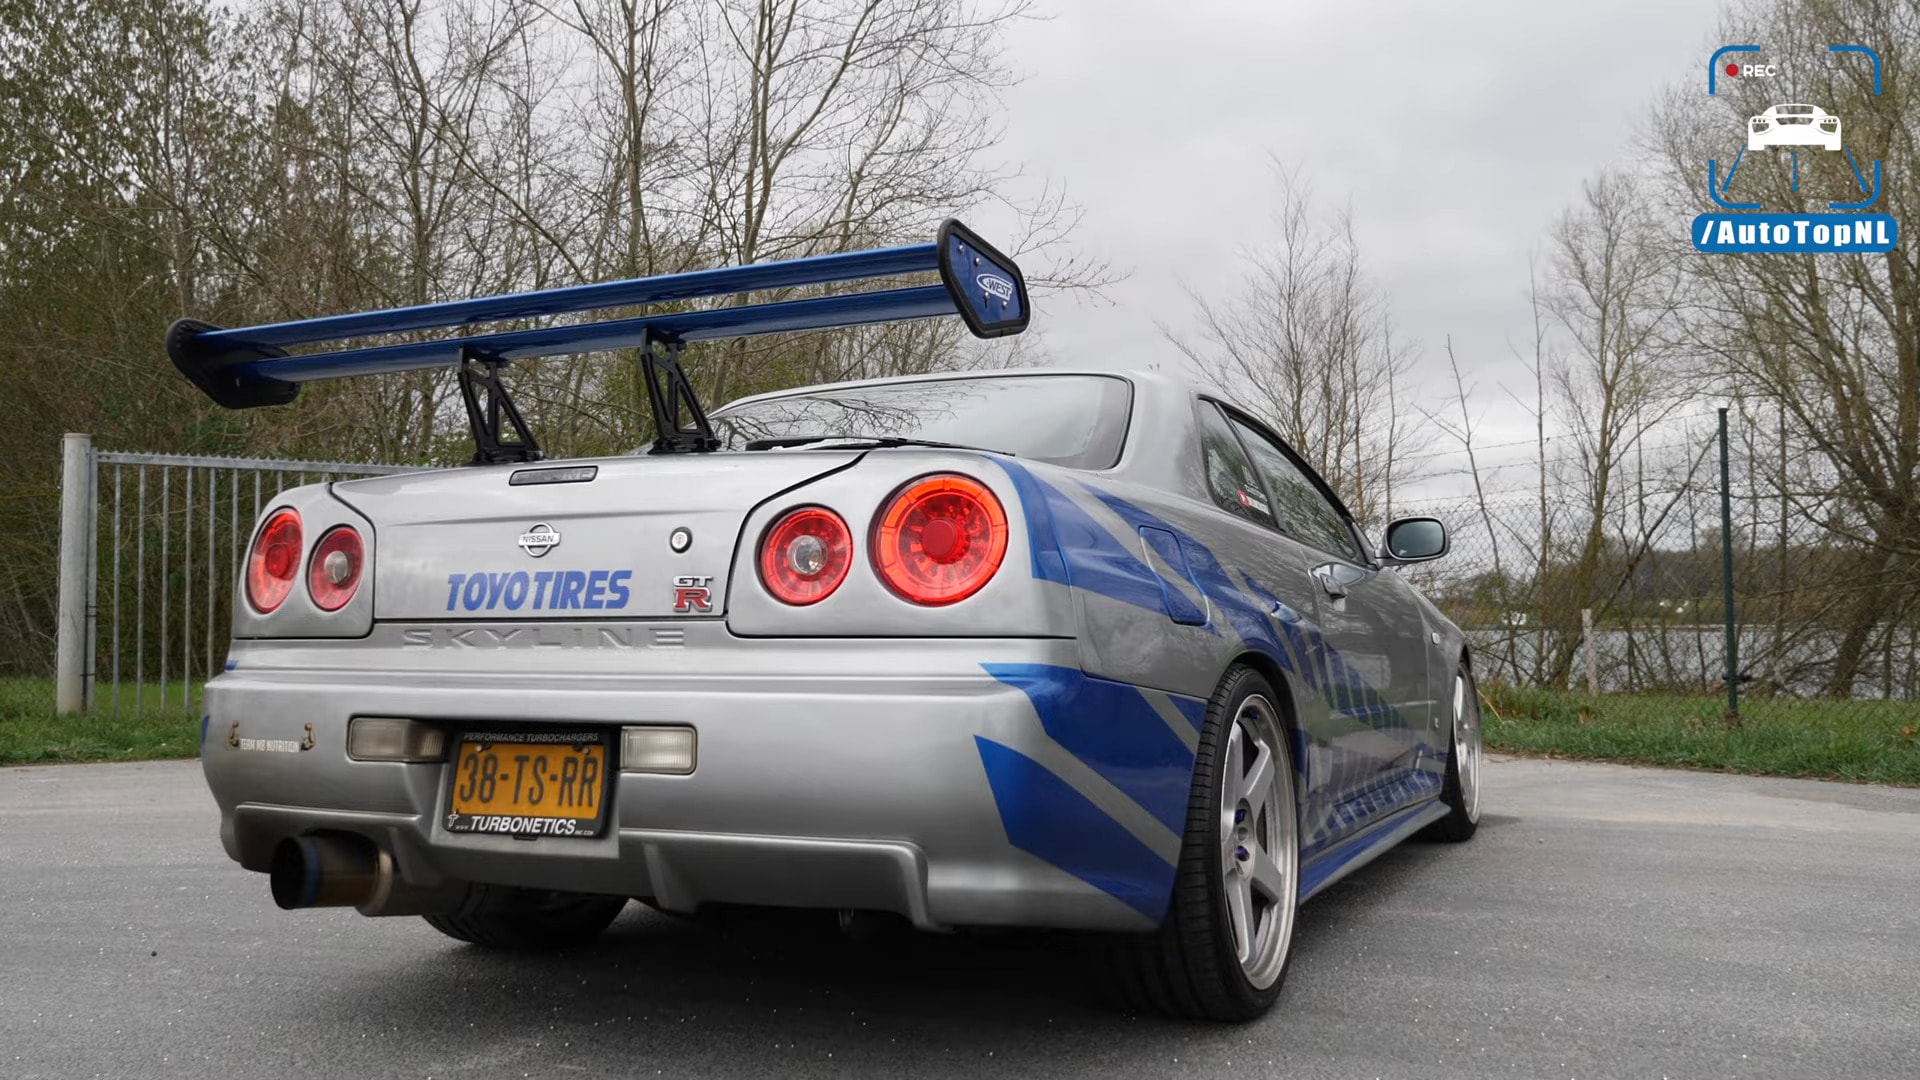 Brian O Conner S 450 Hp Nissan R34 Skyline Gt R Visits Europe Gets Playful Autoevolution